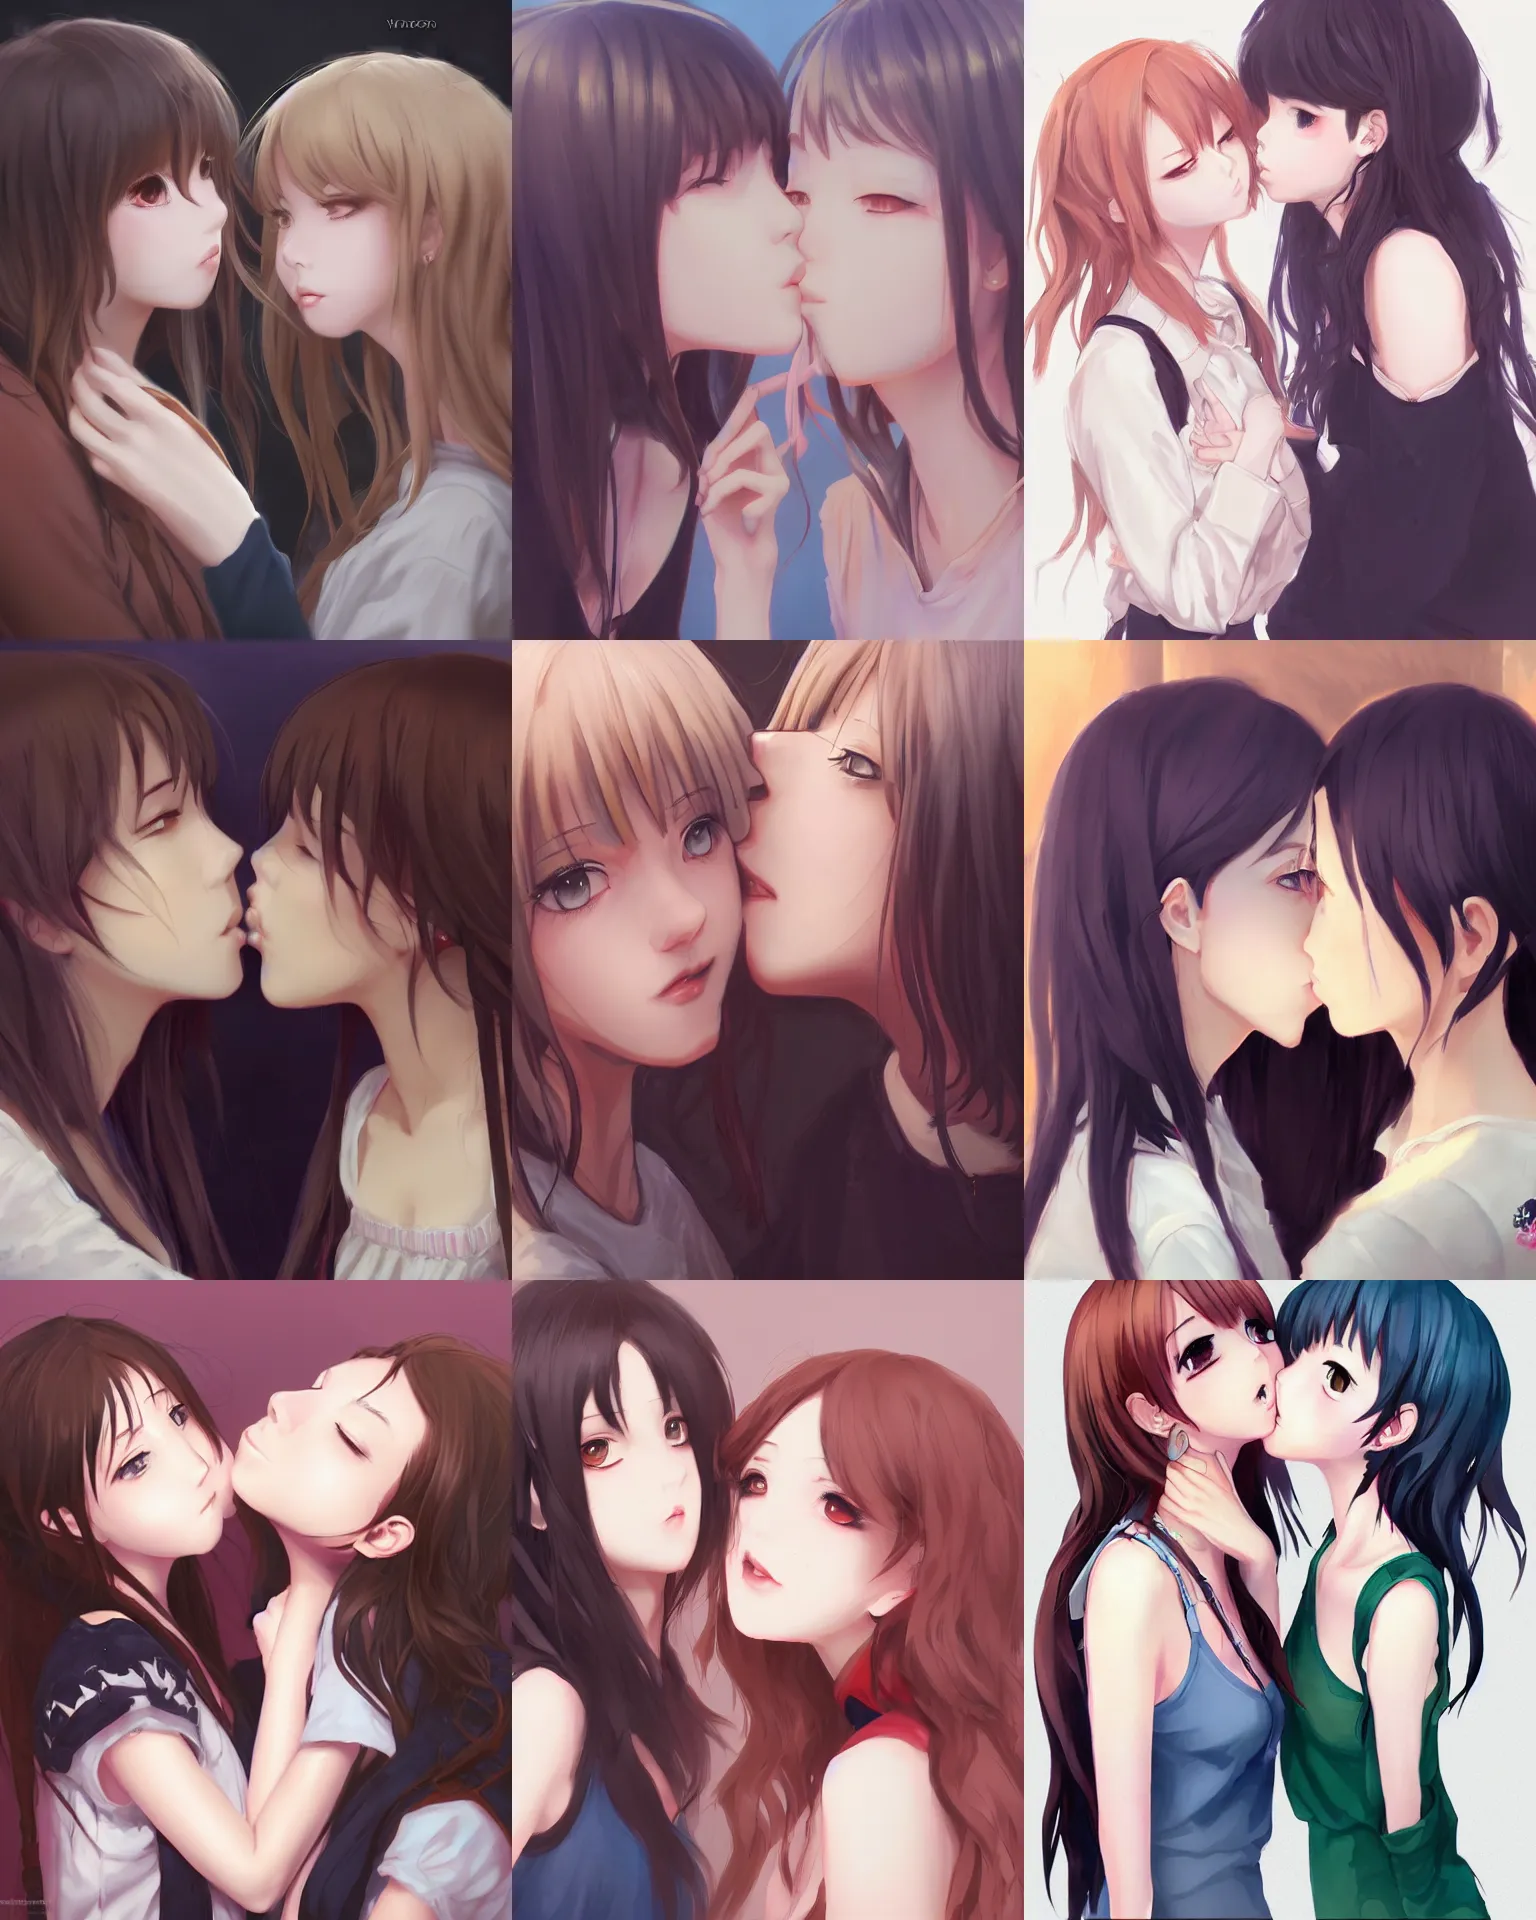 prompthunt: portrait of two girls kissing, anime, drawn by WLOP